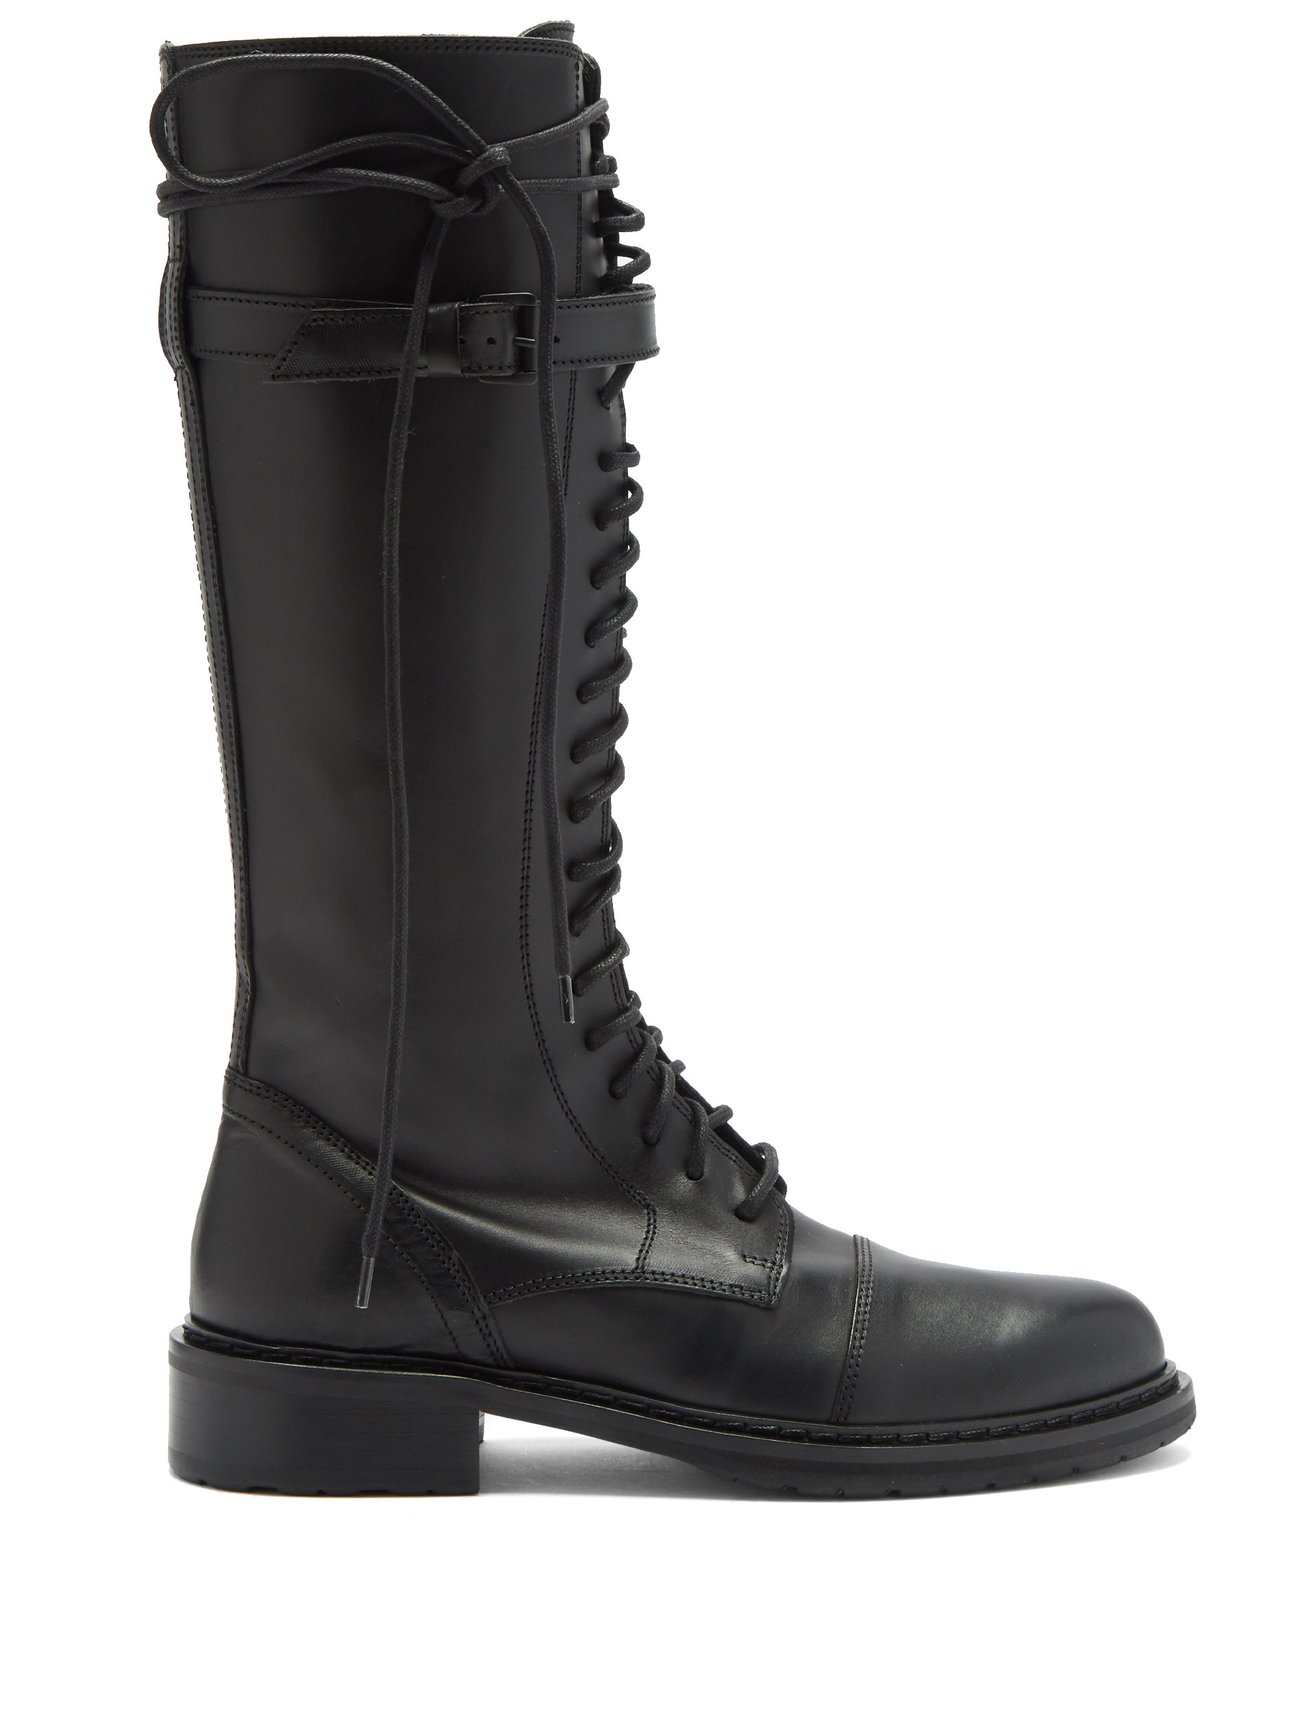 Black Lace-up knee-high leather boots | Ann Demeulemeester ...